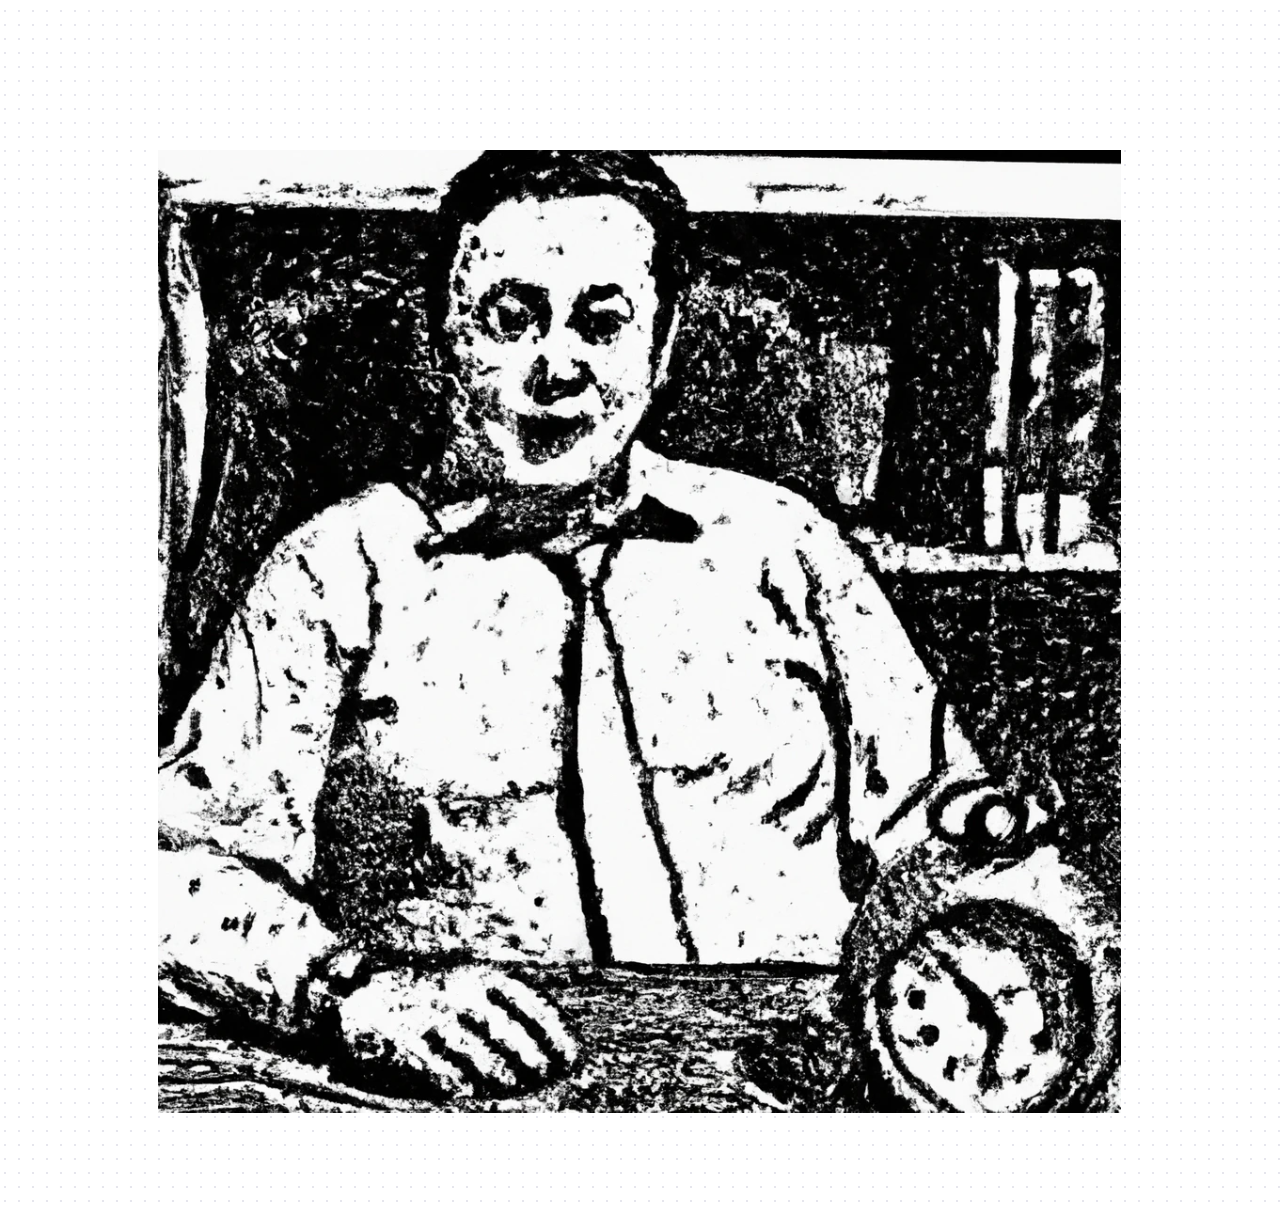 Dall-e2 Query: hatching style, person content, with clock, black and white